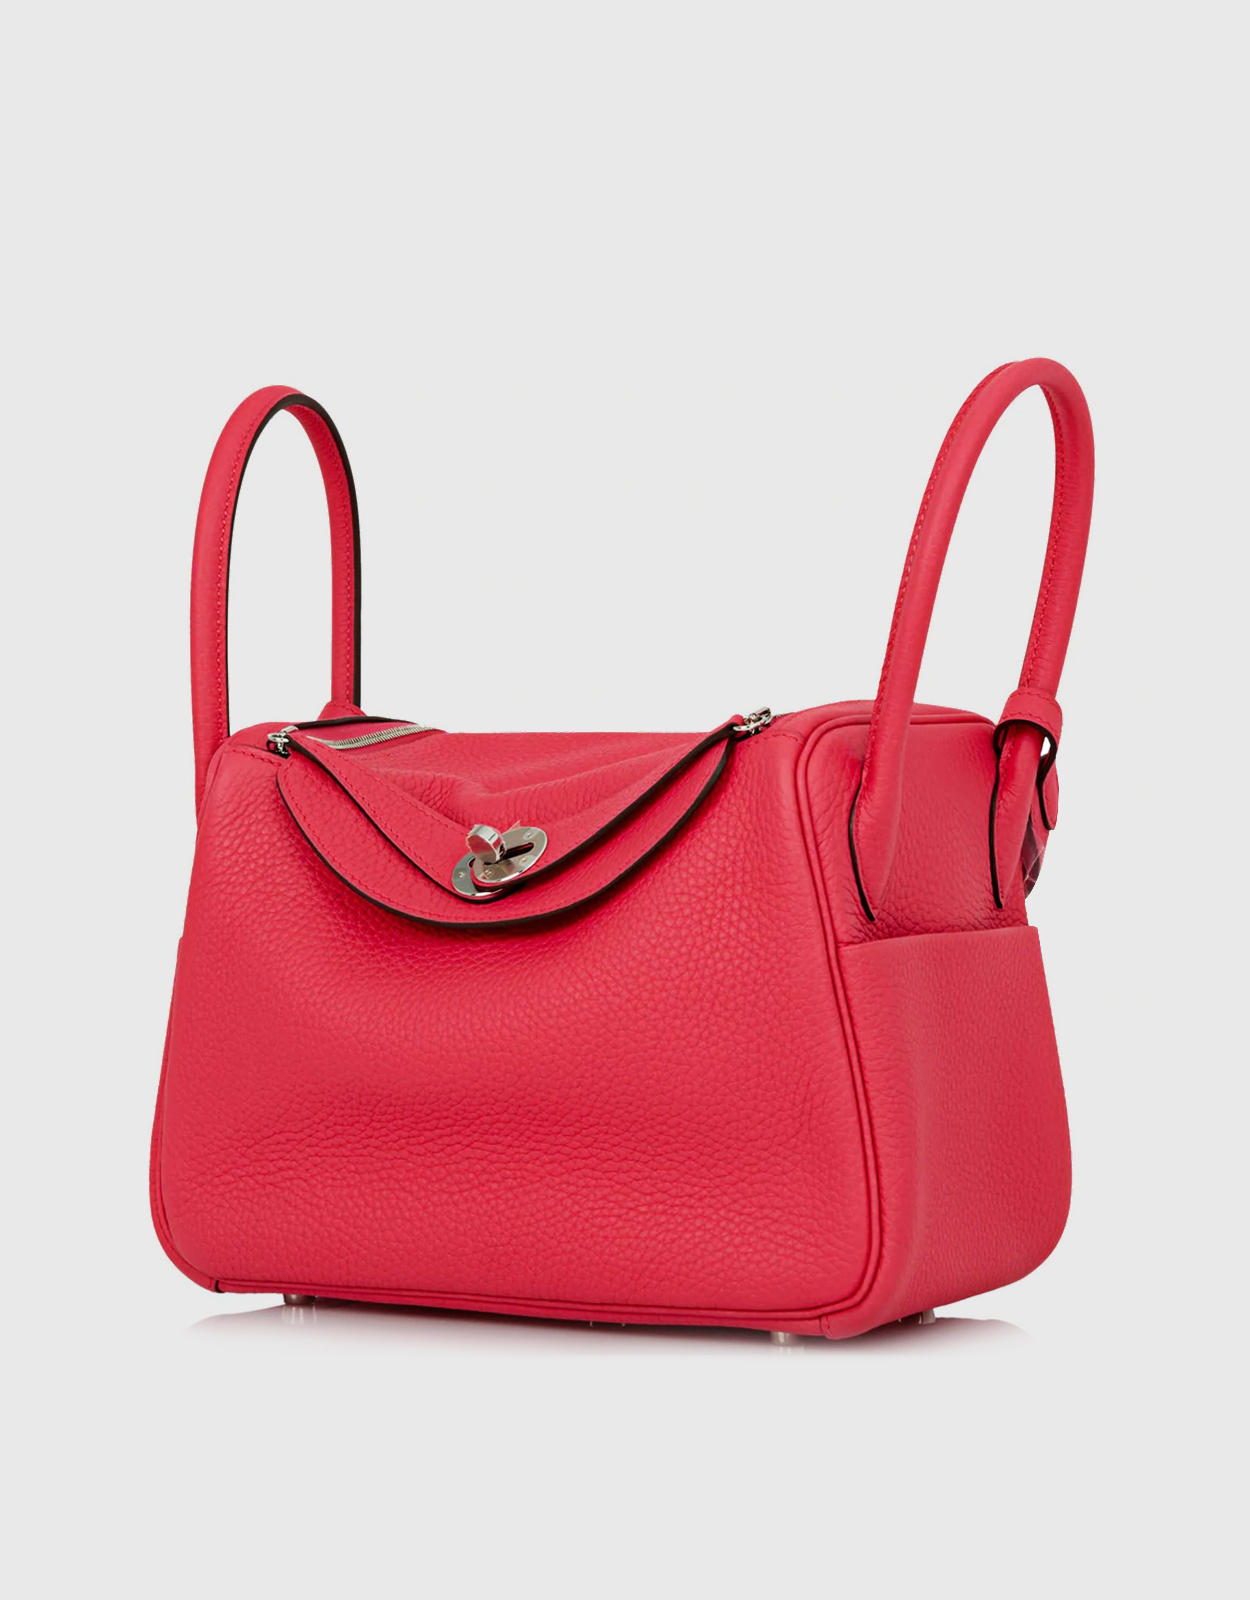 Hermes lindy 30 in swift This item is only available at the store